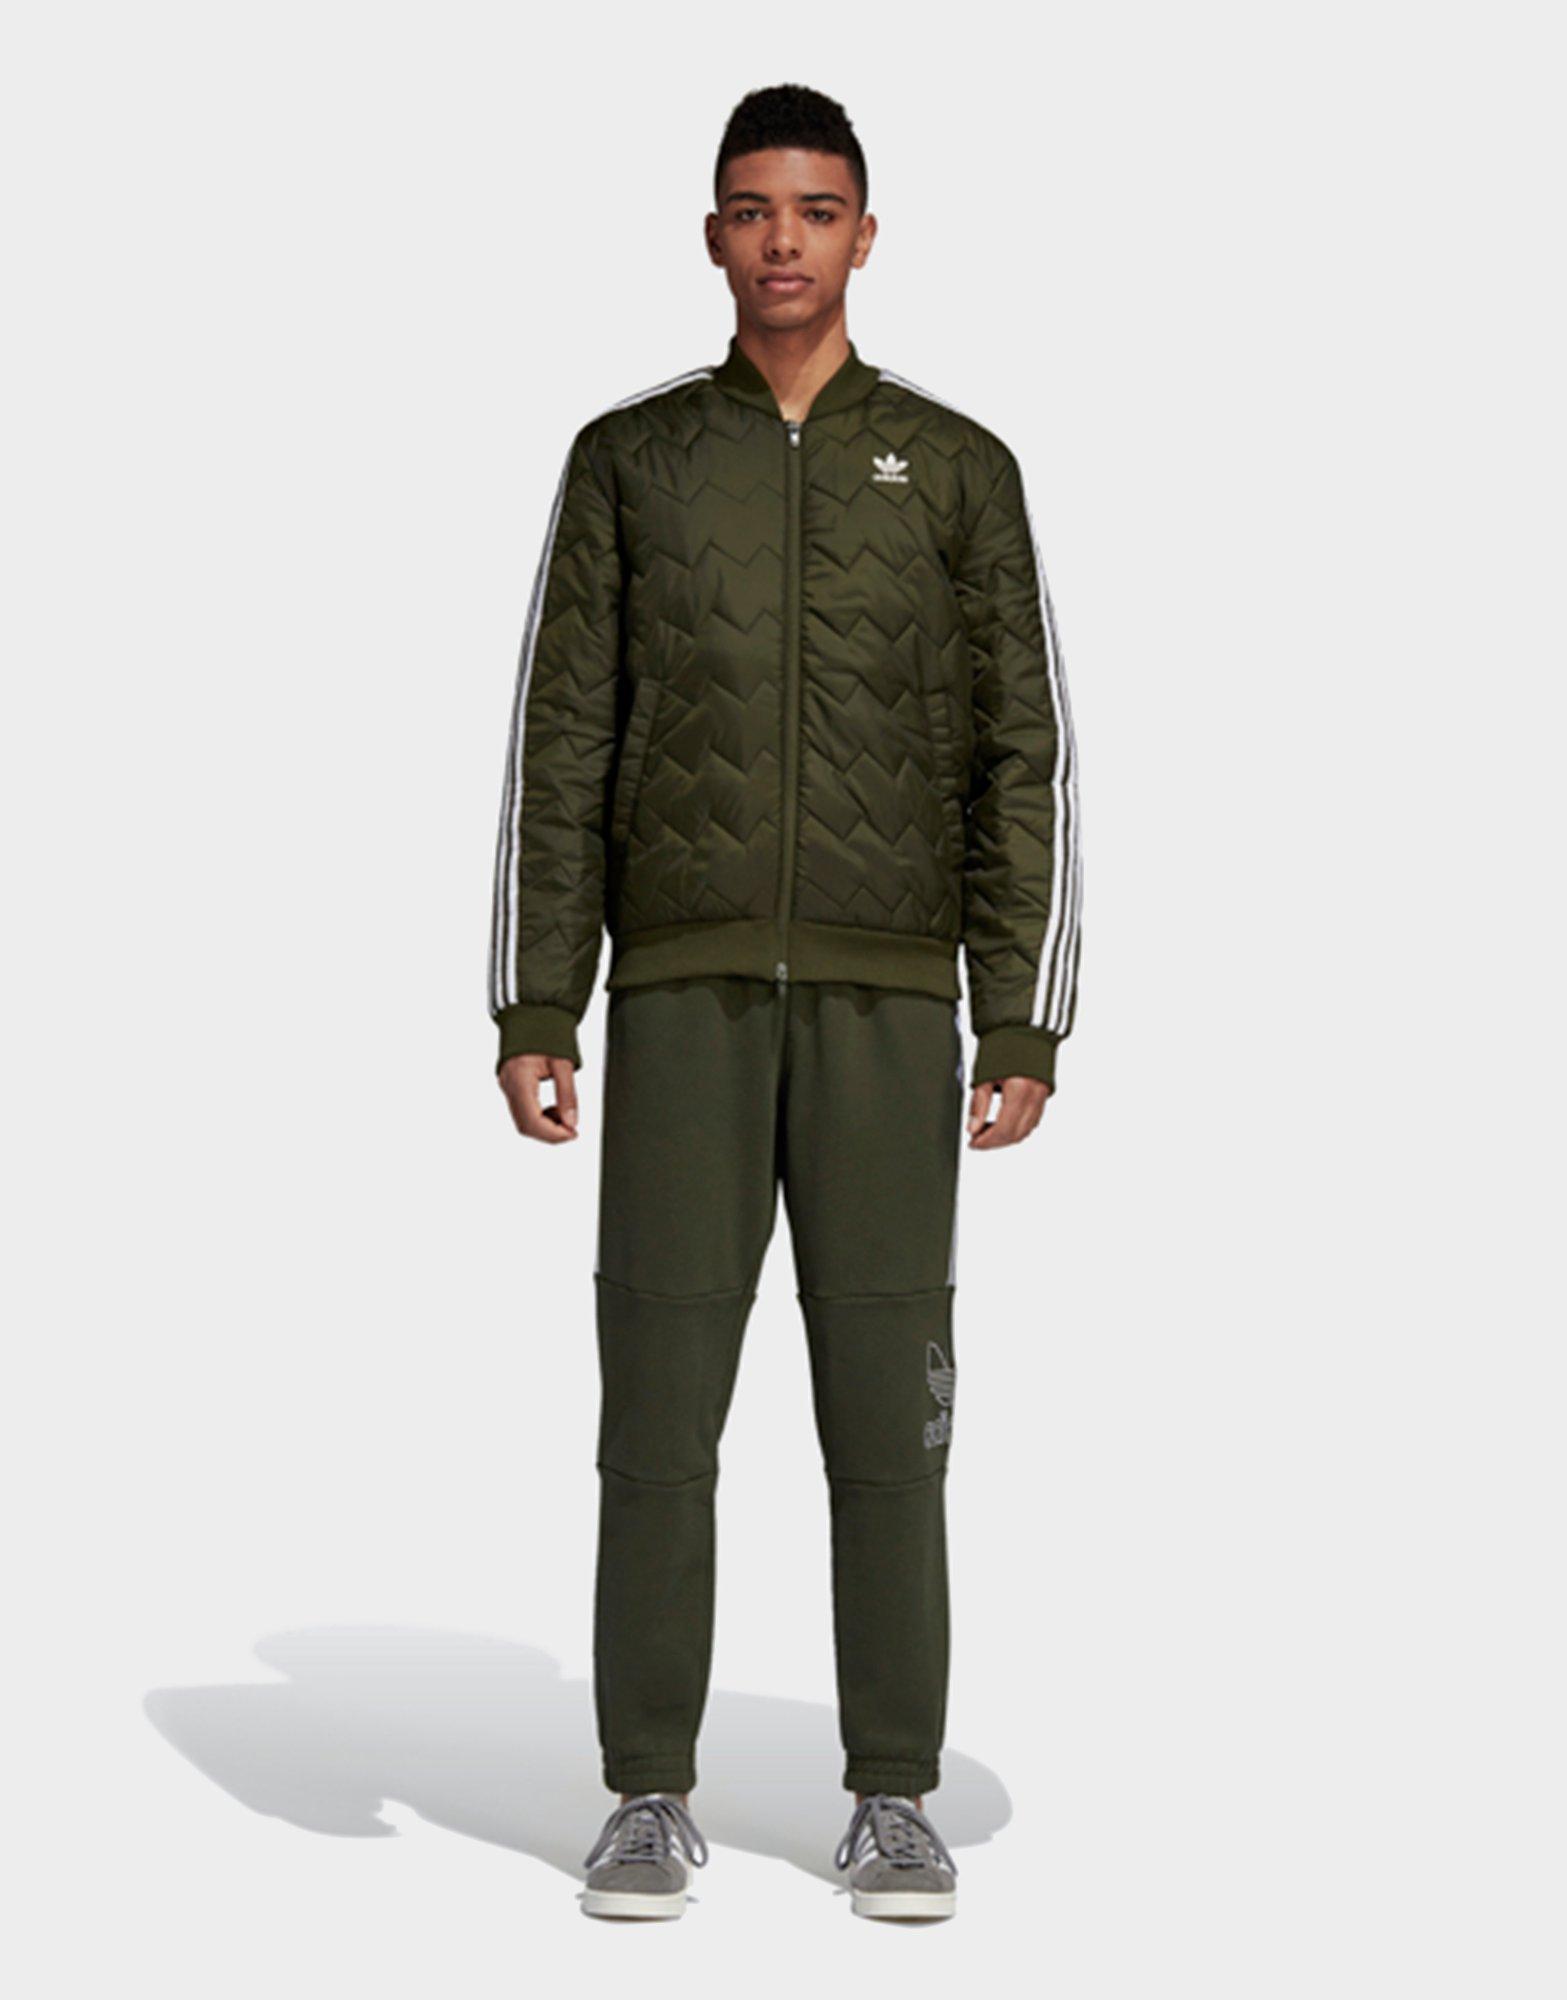 adidas sst quilted jacke